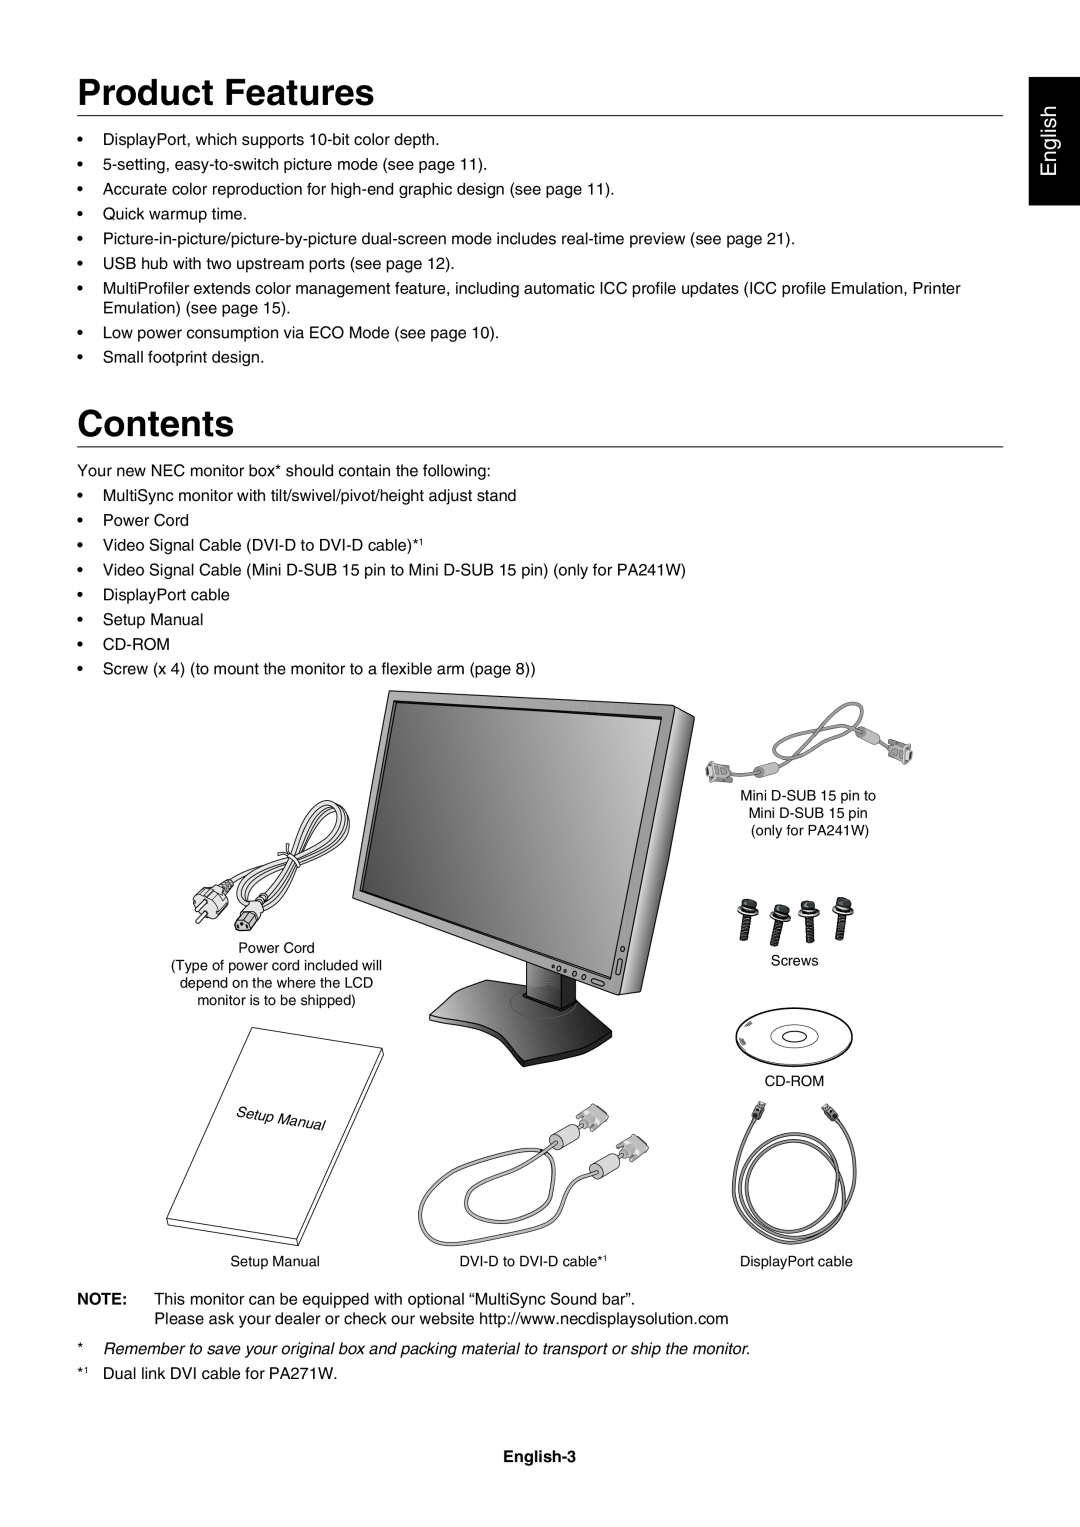 NEC PA271W user manual Product Features, Contents, English-3 